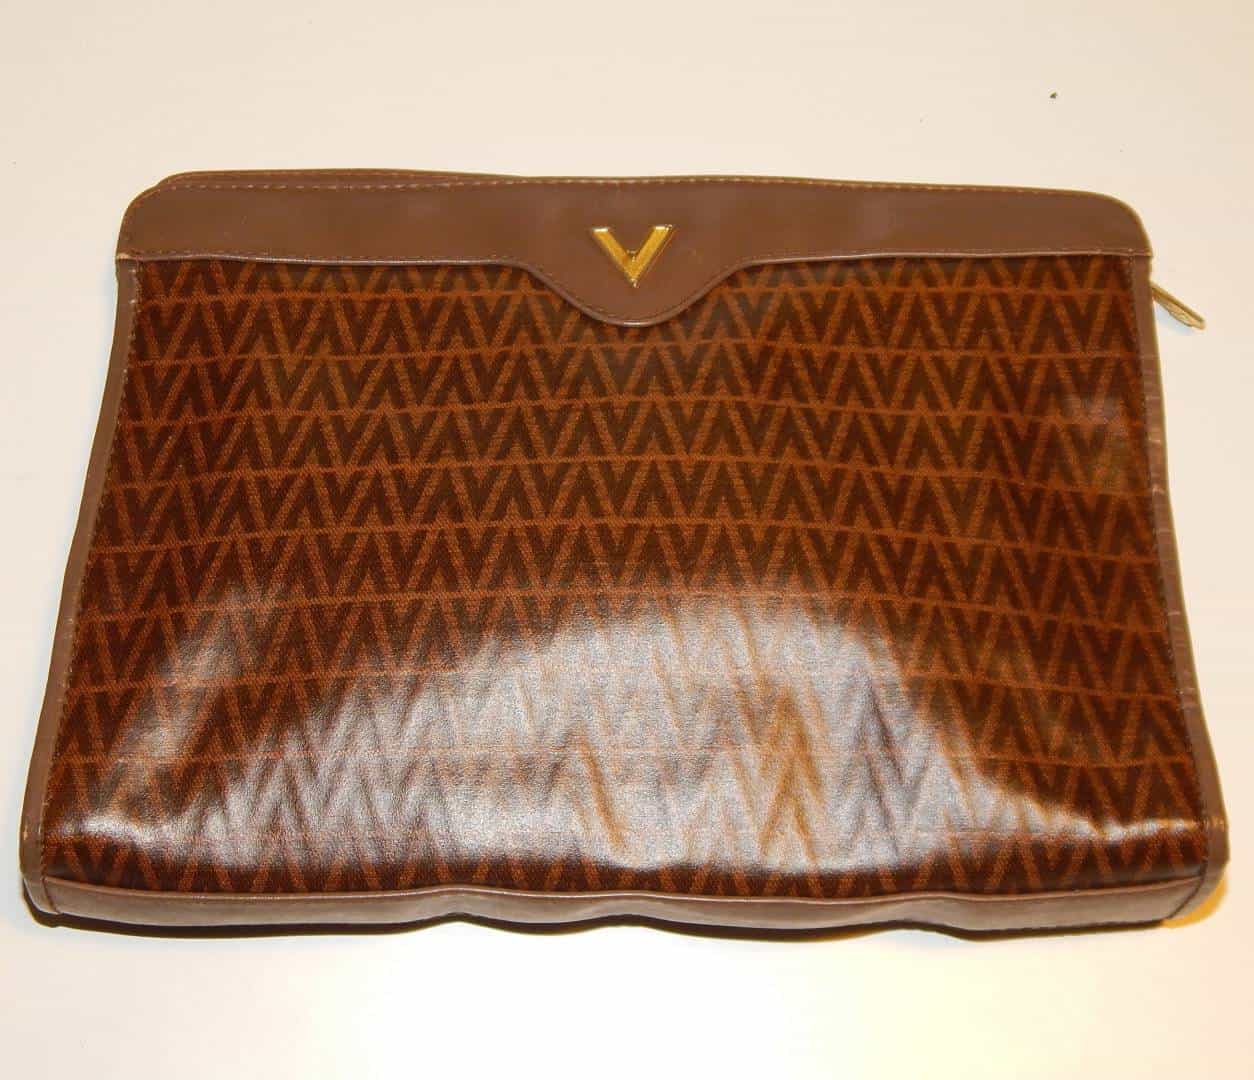 Mario Valentino Authenticated Leather Clutch Bag